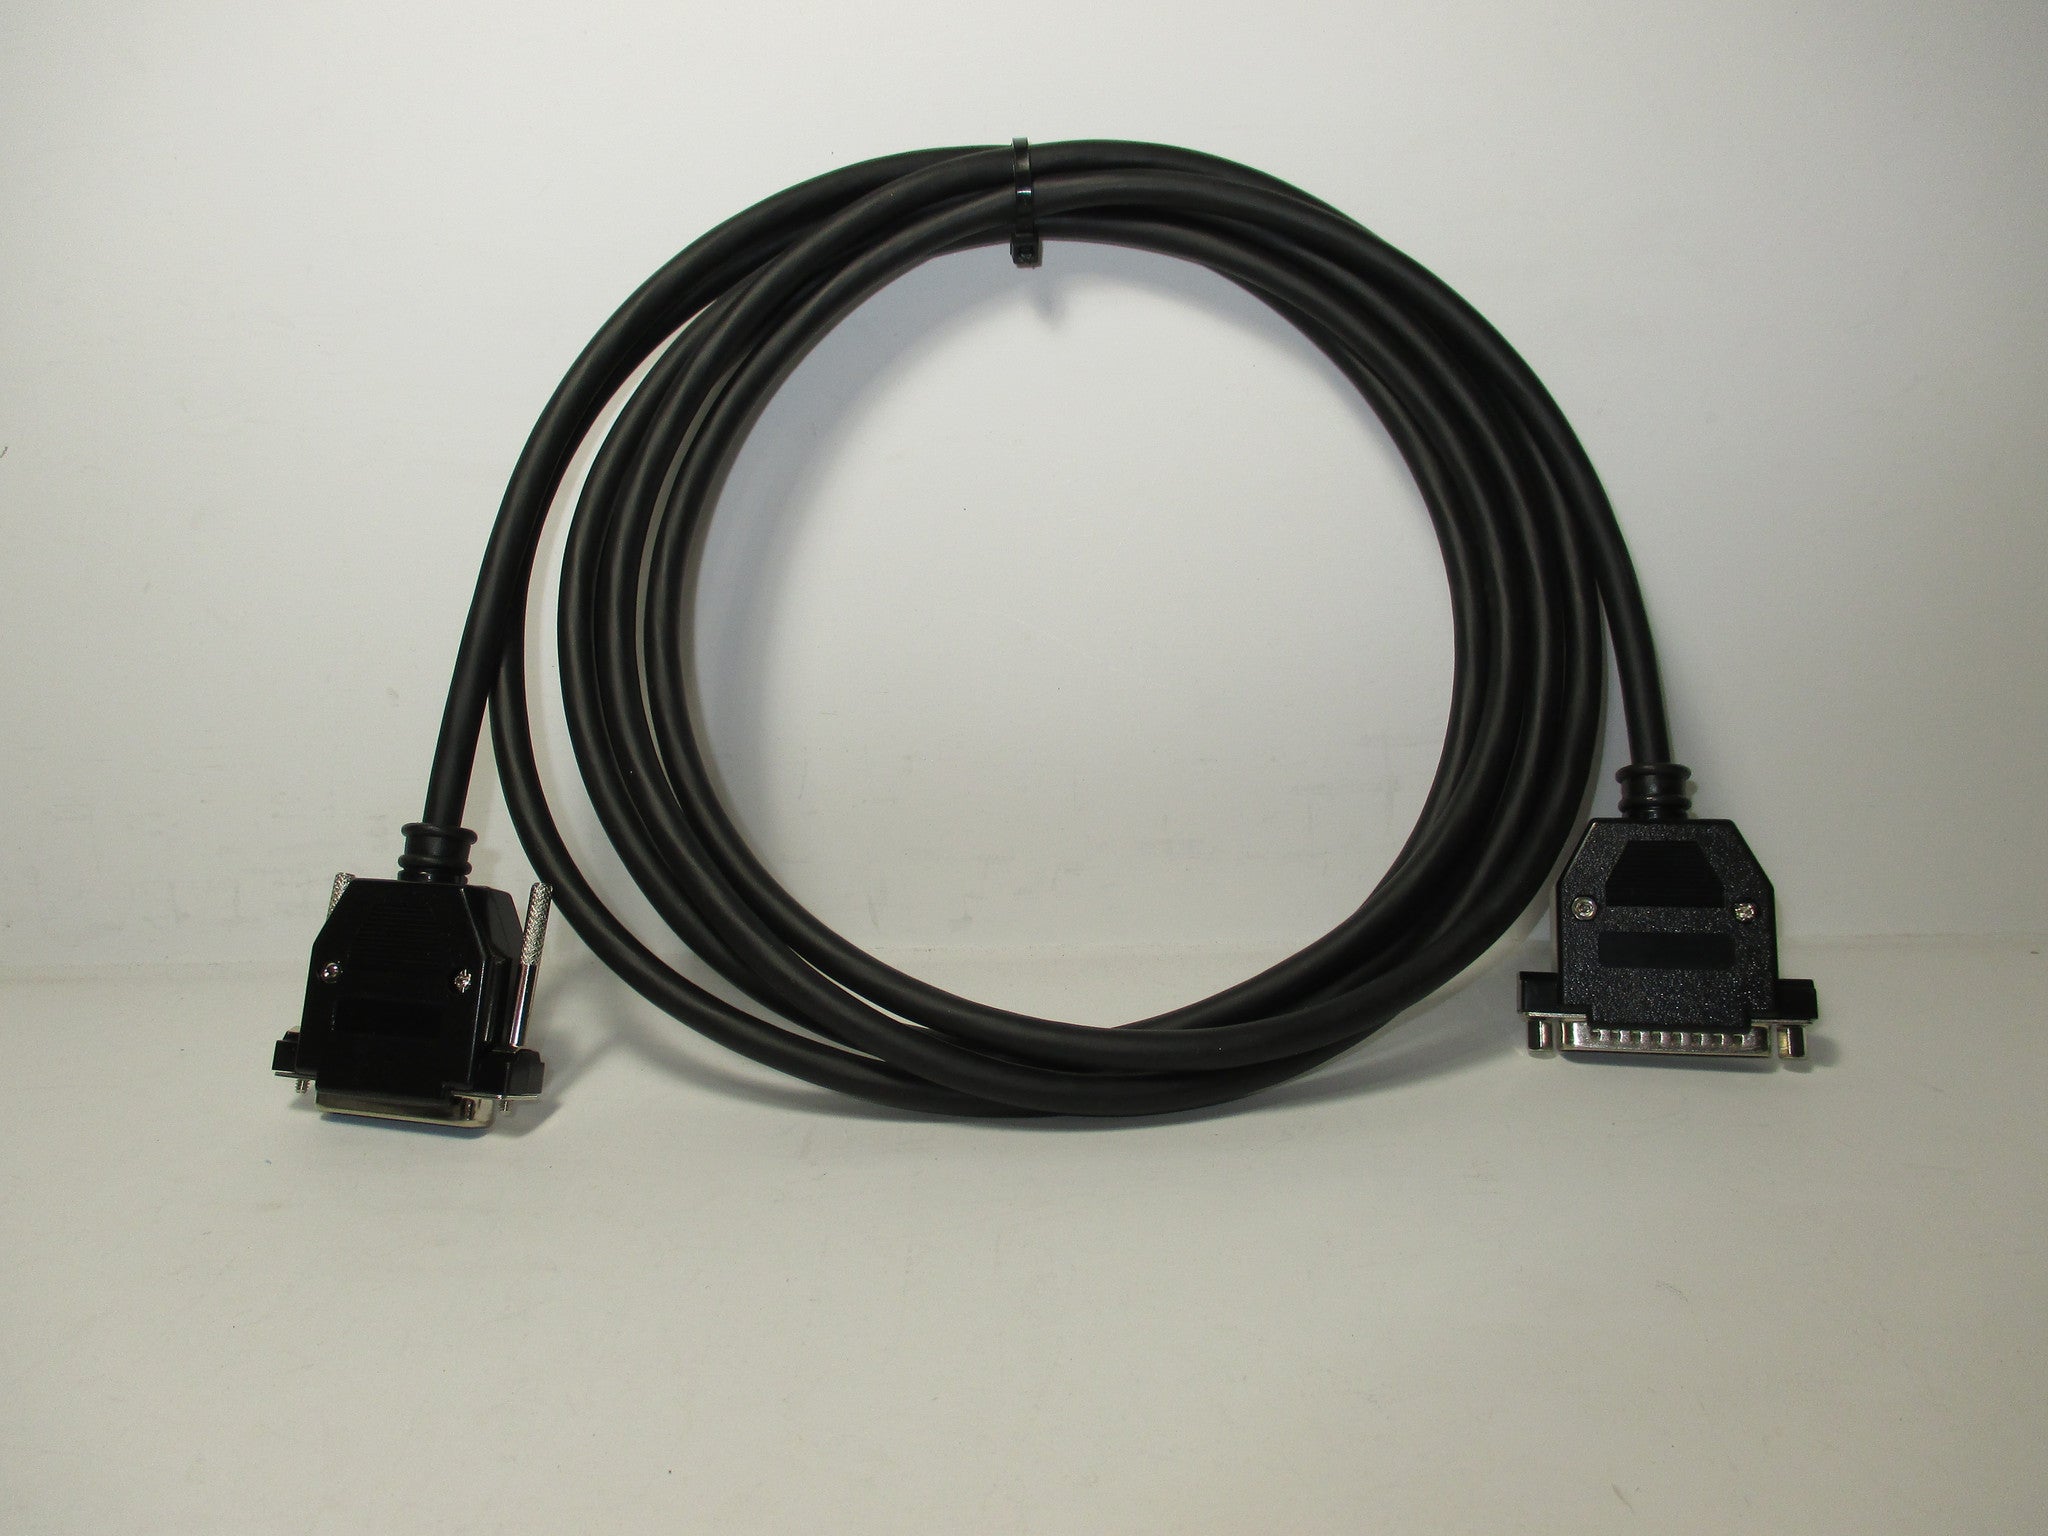 SPX OBDII CABLE EXTENSION, 20', 534 06317X20